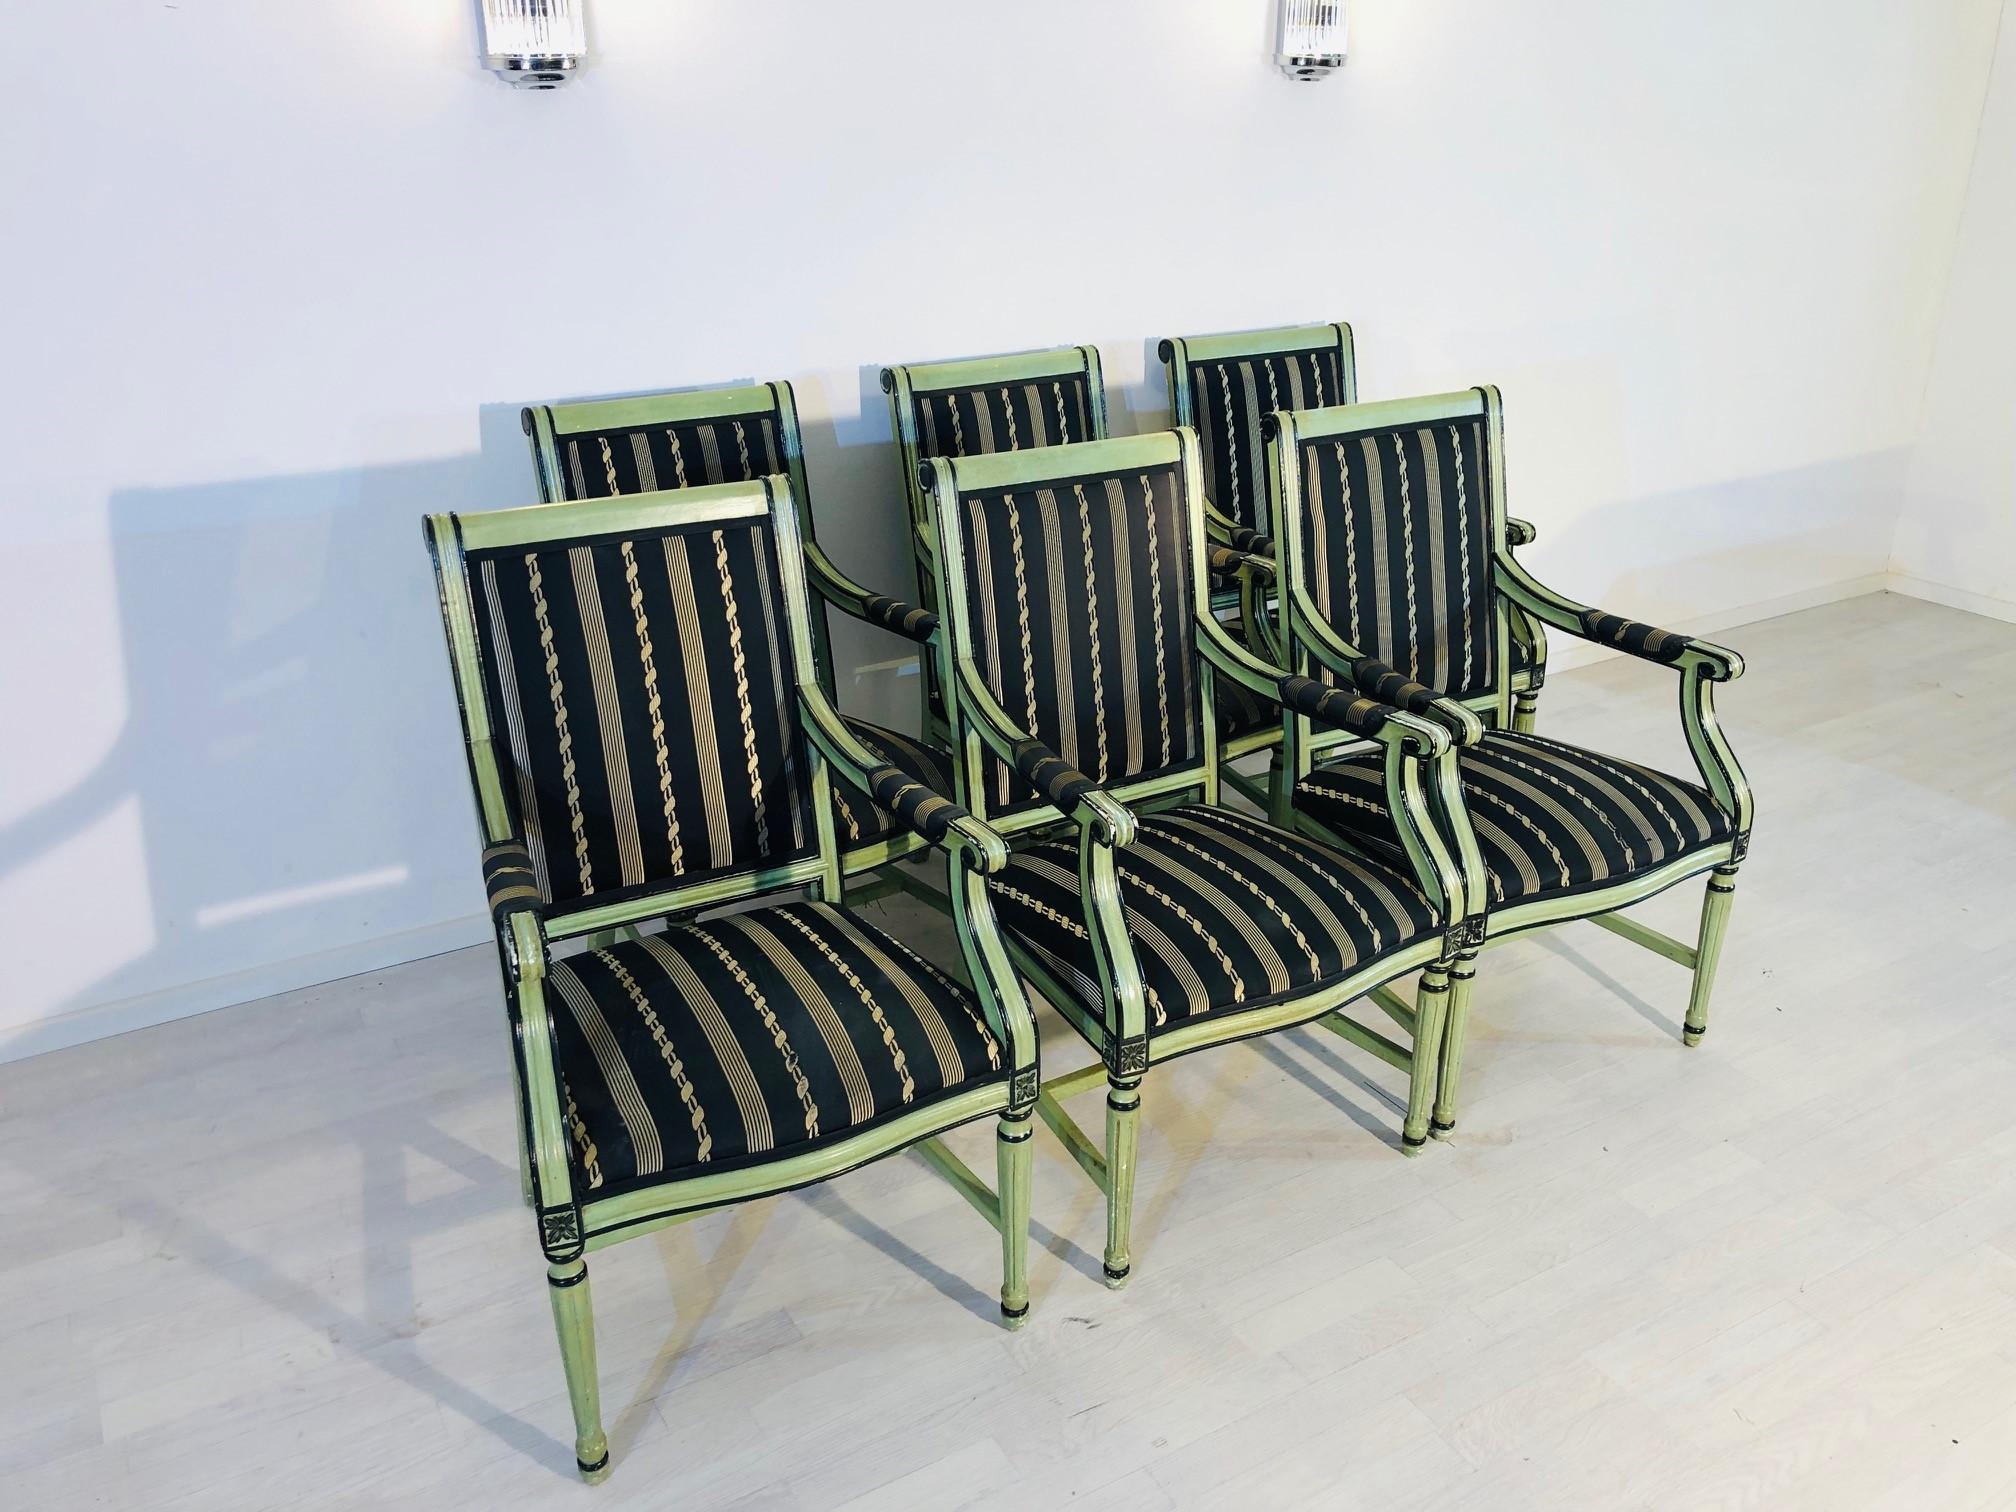 Beautiful set of six farmhouse style armchairs with a wonderful mint-green finish. These mid-century pieces from the 1960s convince with their unique and Classic farmhouse design with fluted legs and curved armrests with finely crafted details. They